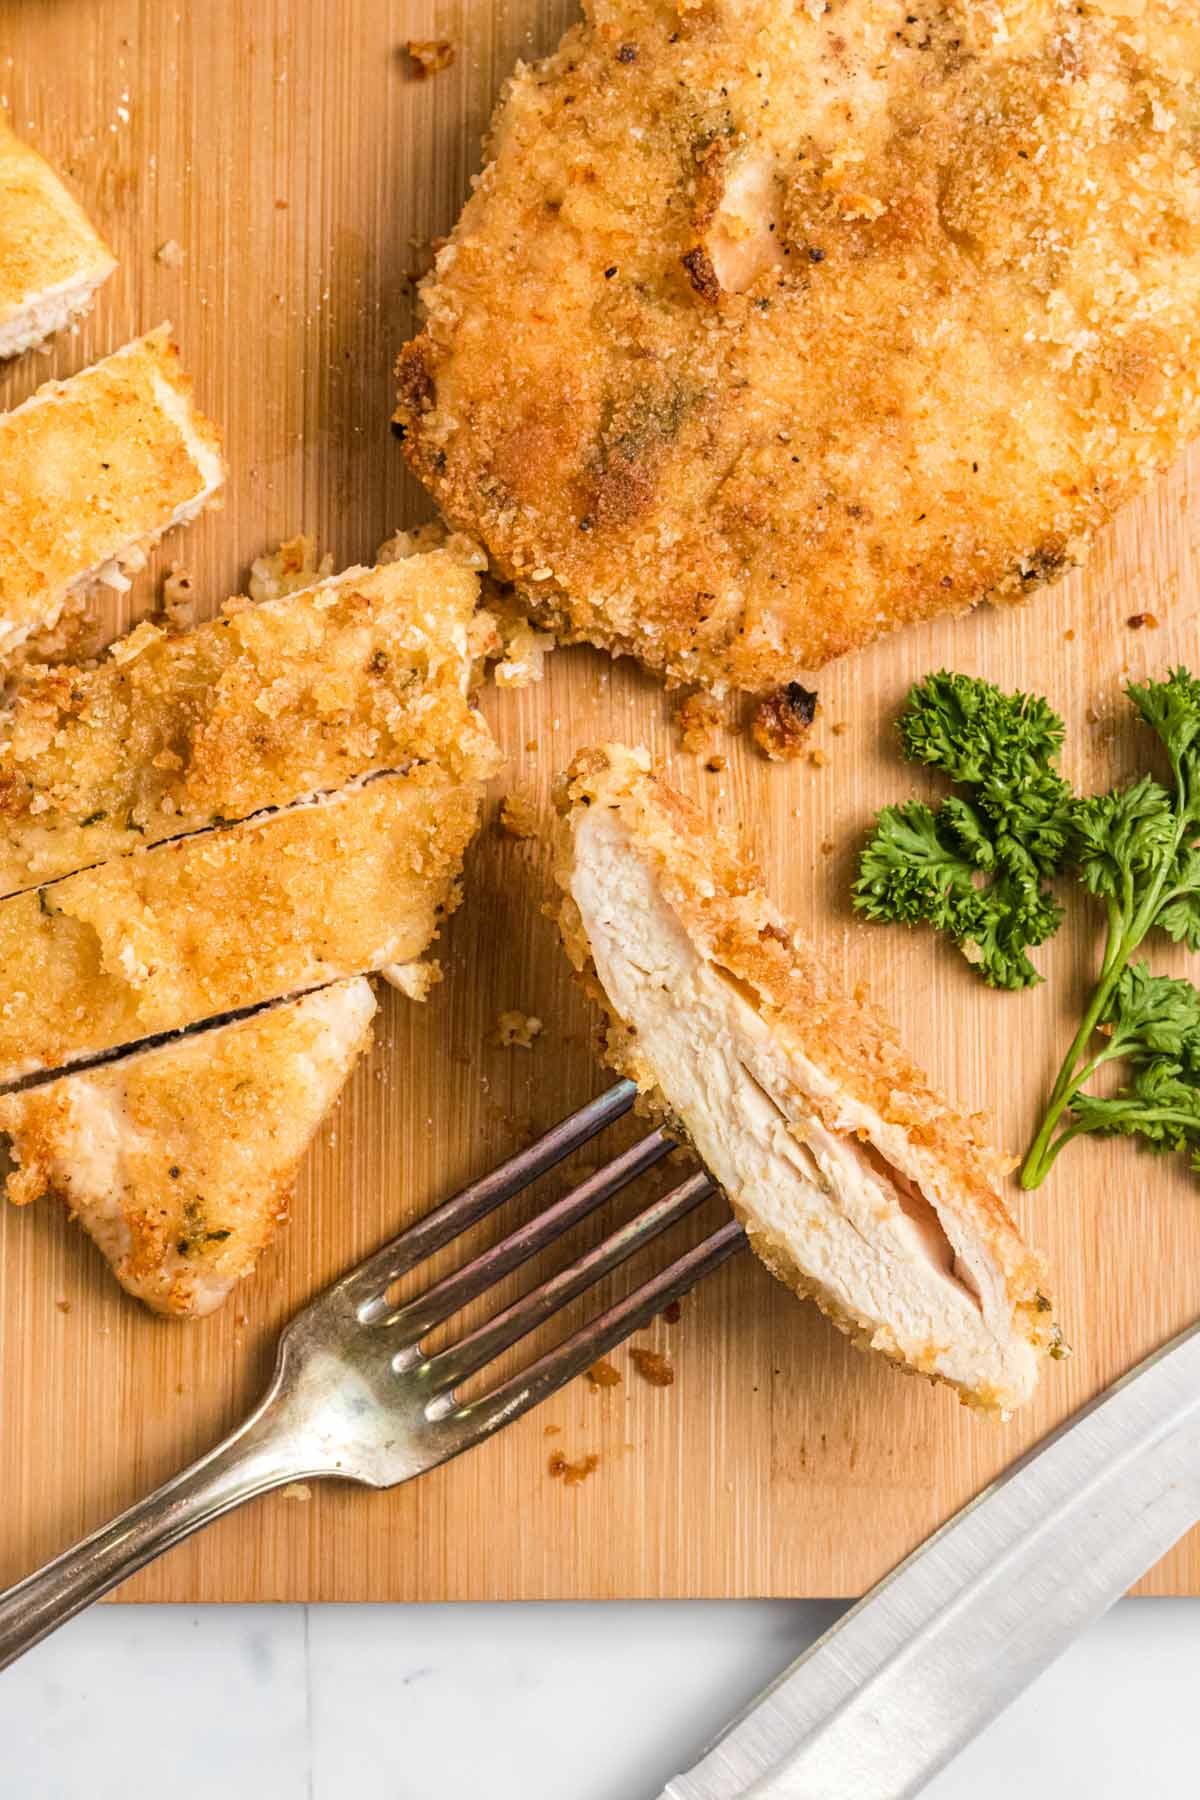 baked chicken with bread crumbs